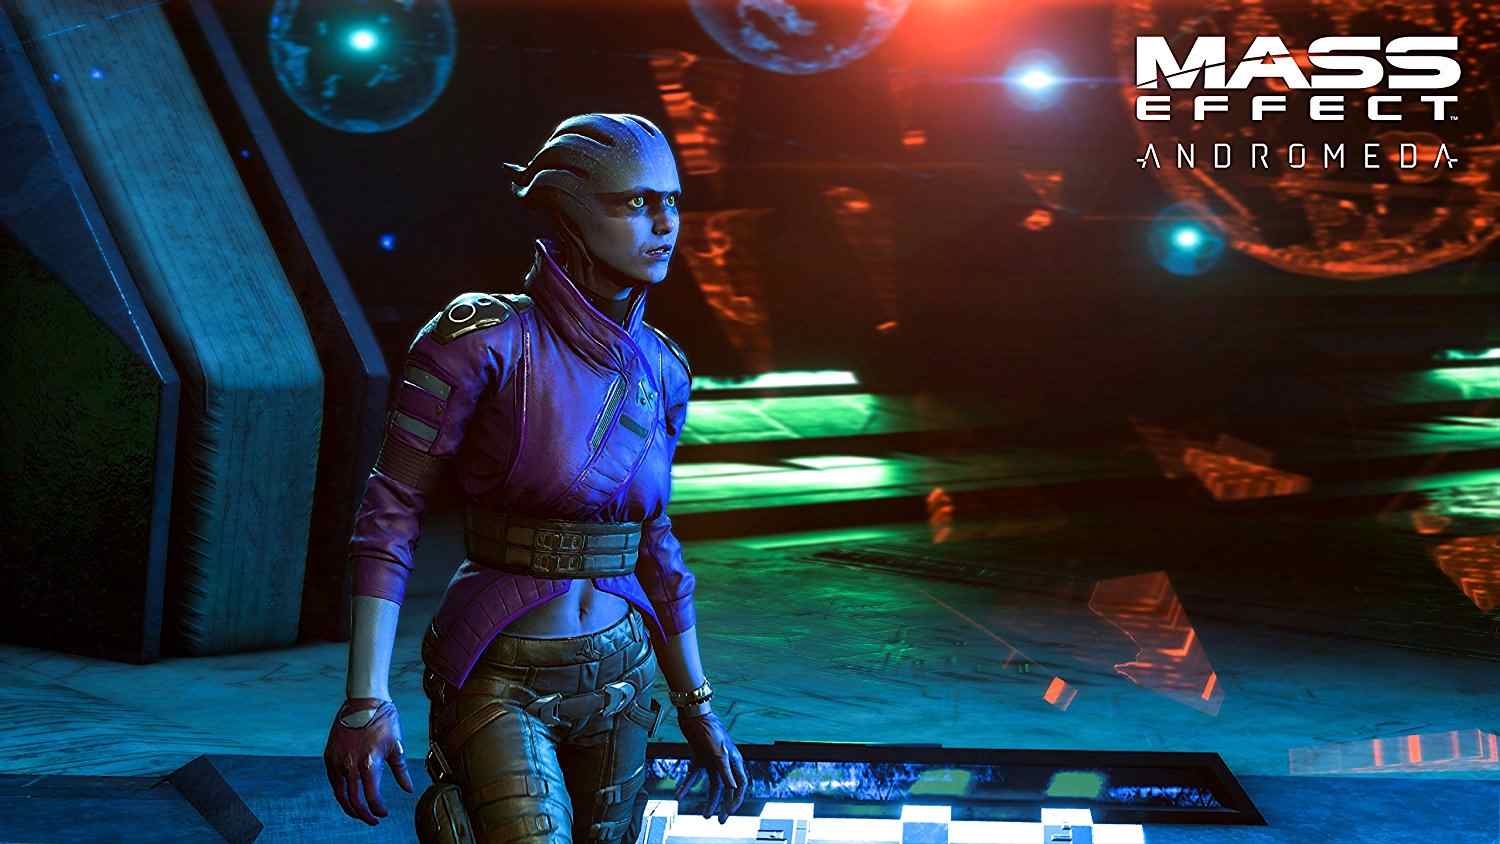 mass effect andromeda deluxe edition